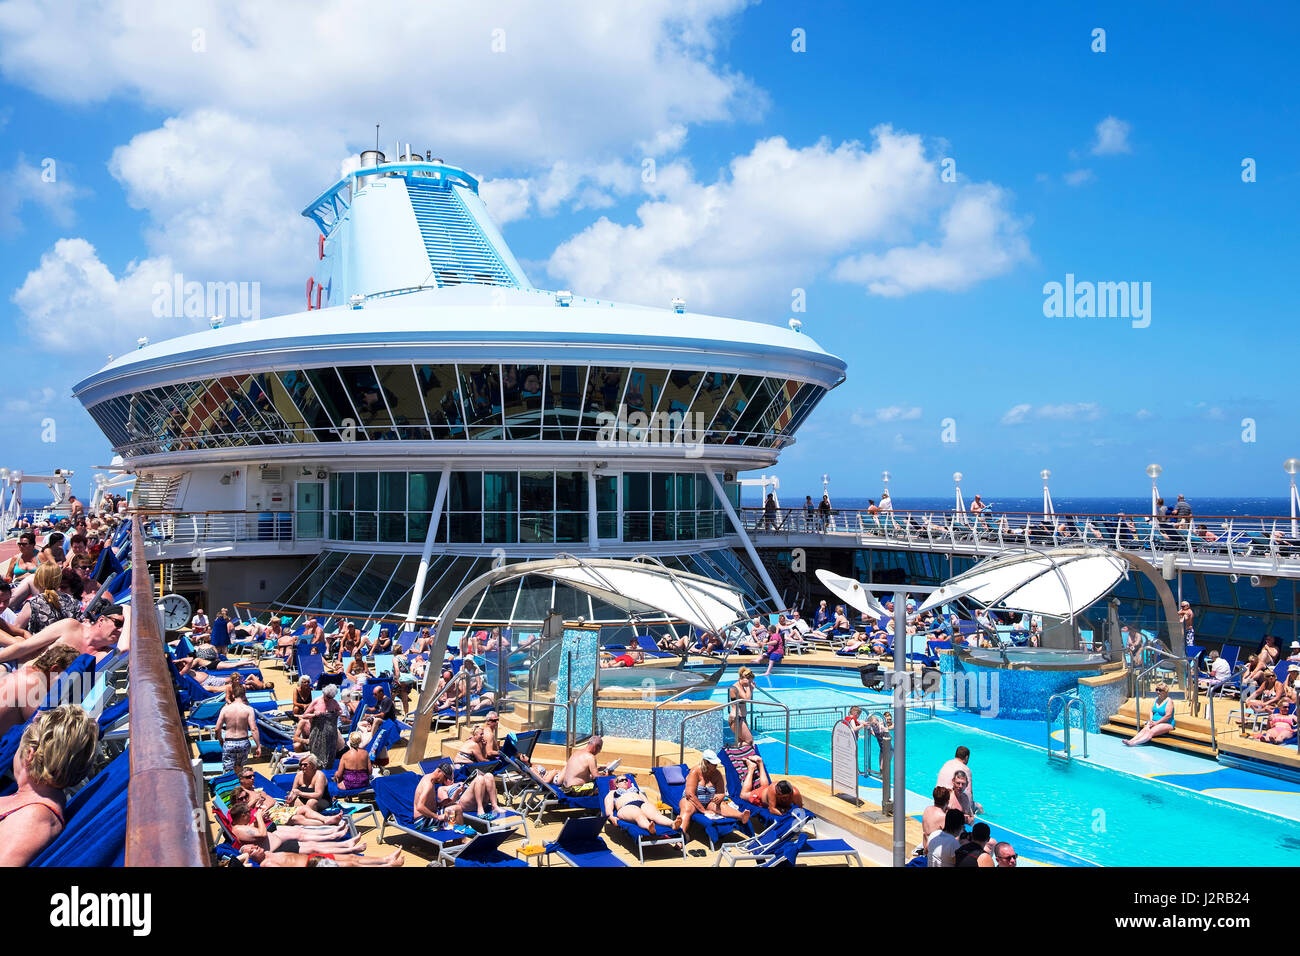 The Thomson Cruise ship Discovery on a Mediterannean cruise Stock Photo